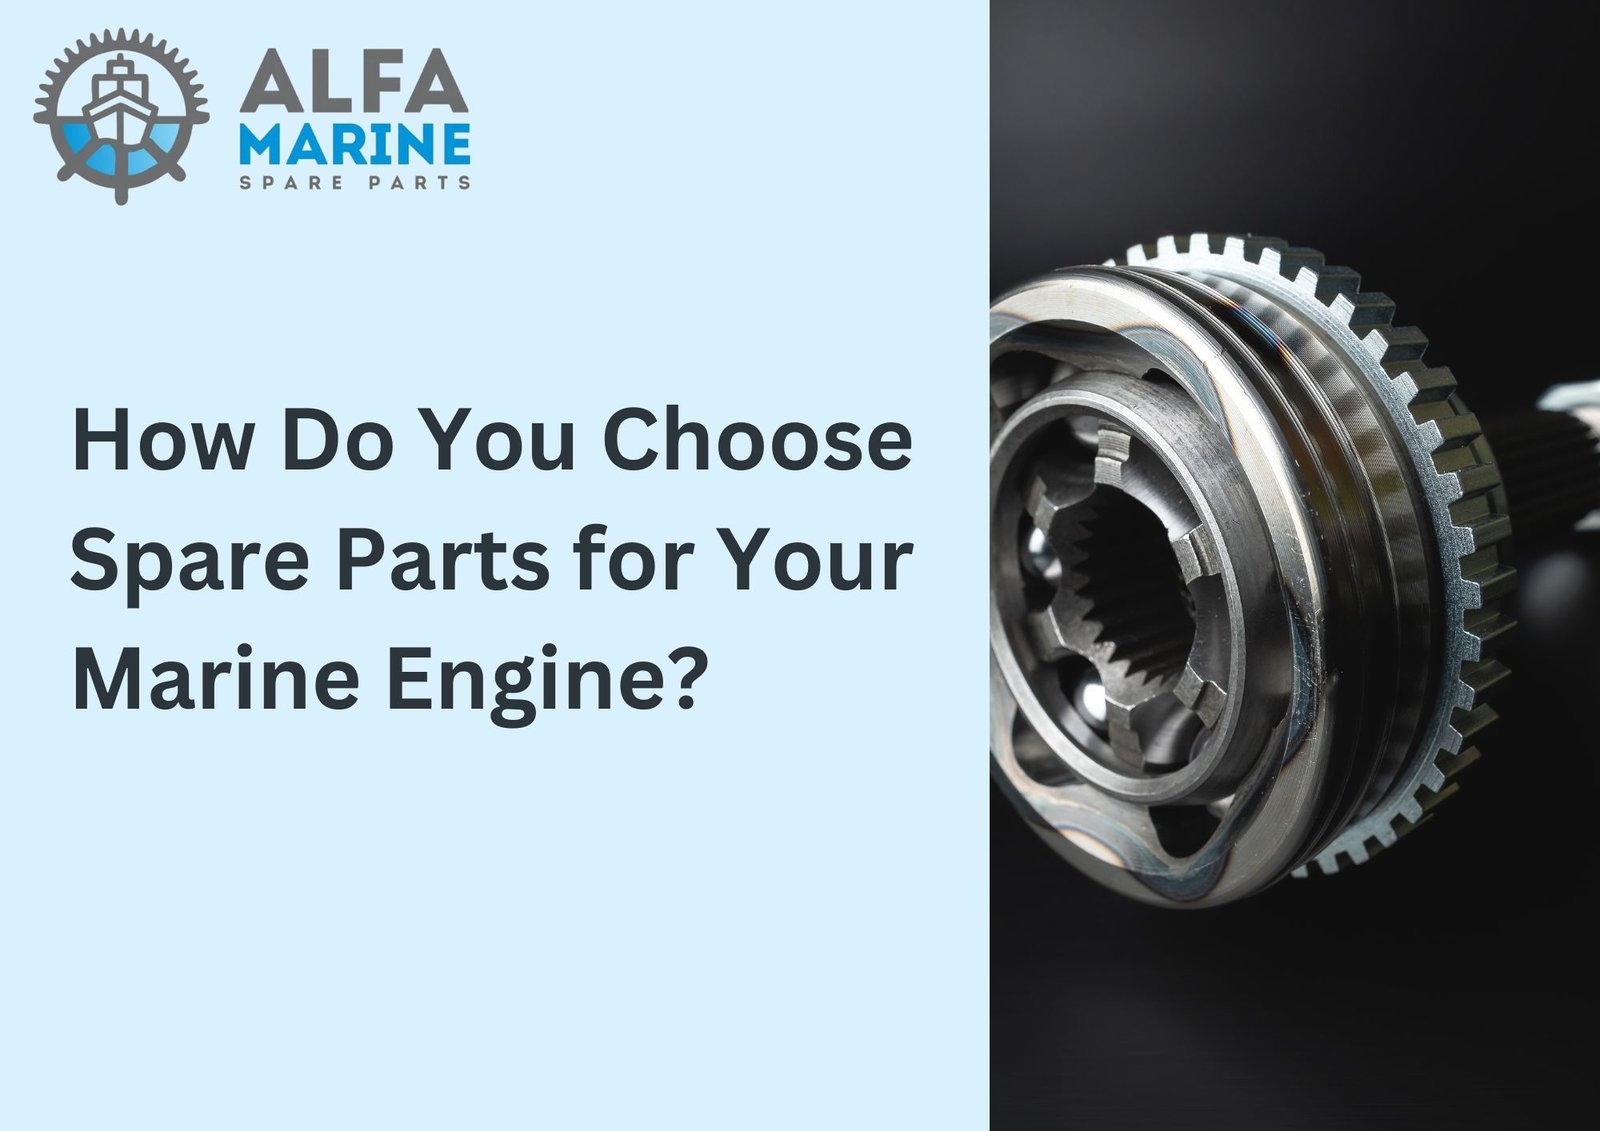 How Do You Choose Spare Parts for Your Marine Engine?